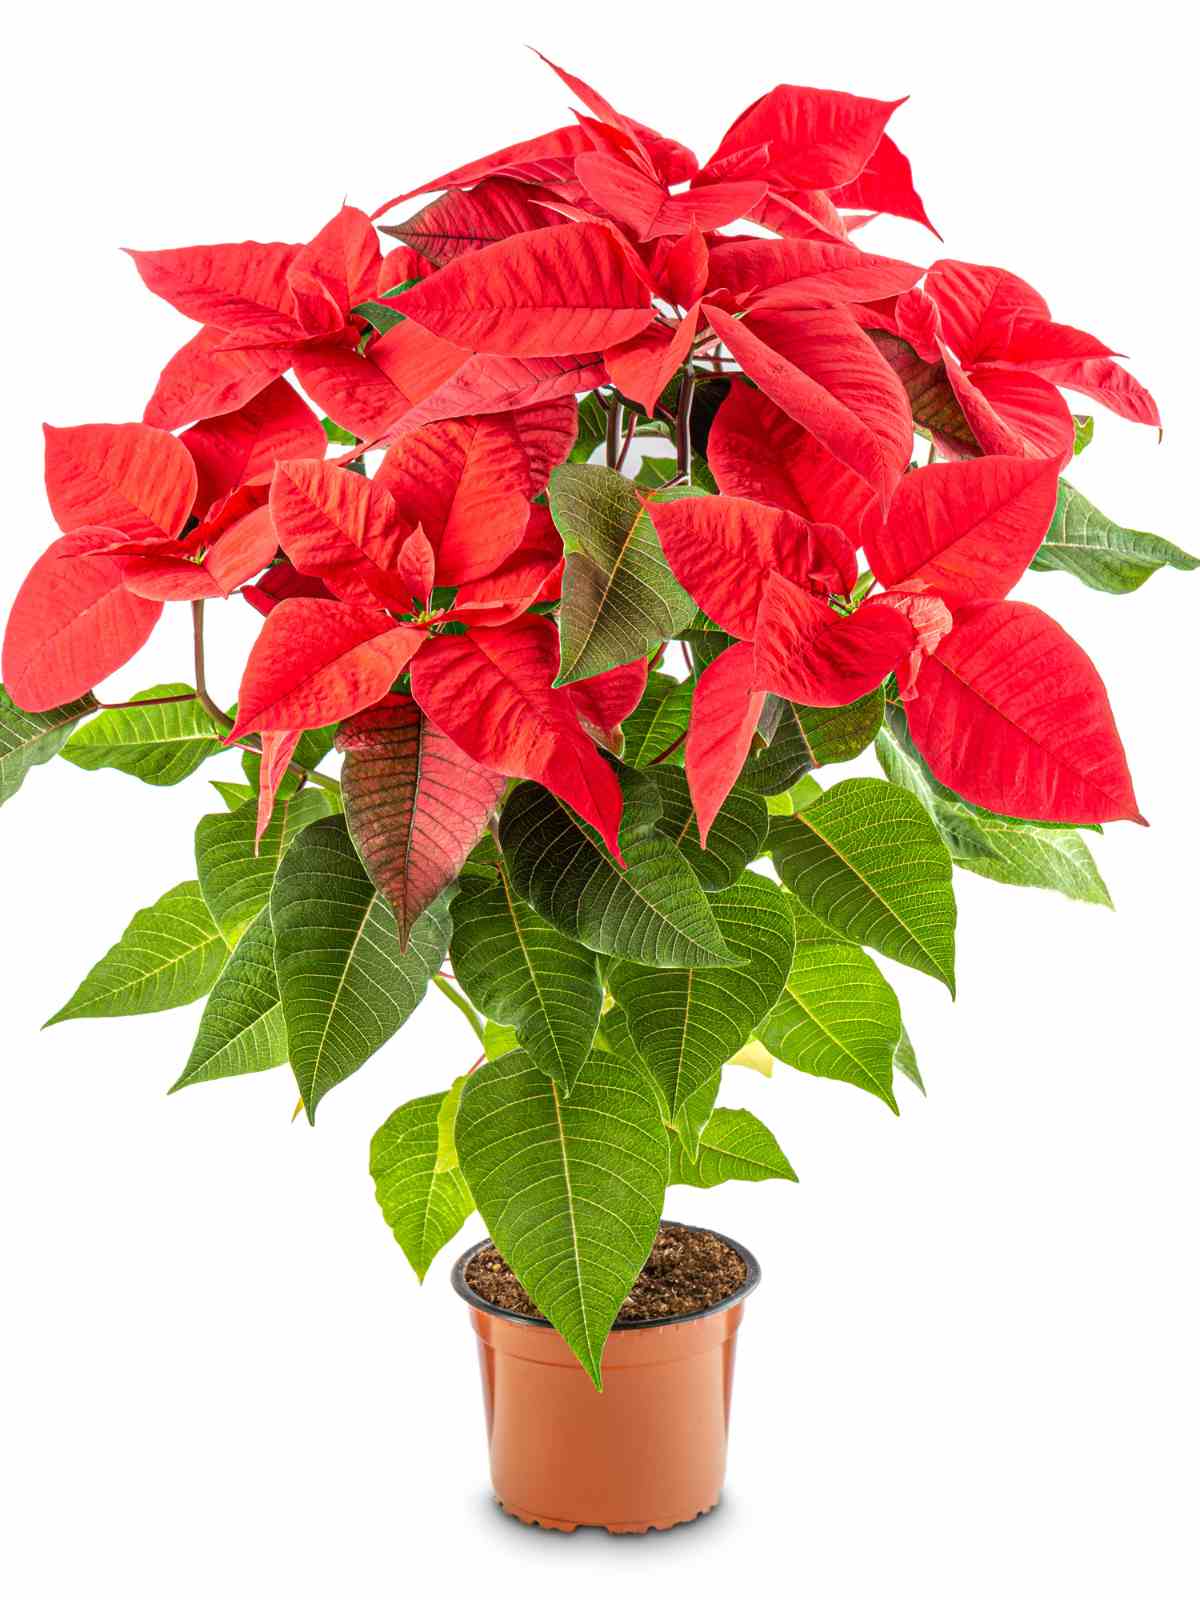 how to care for poinsettia plant - ultimate guide